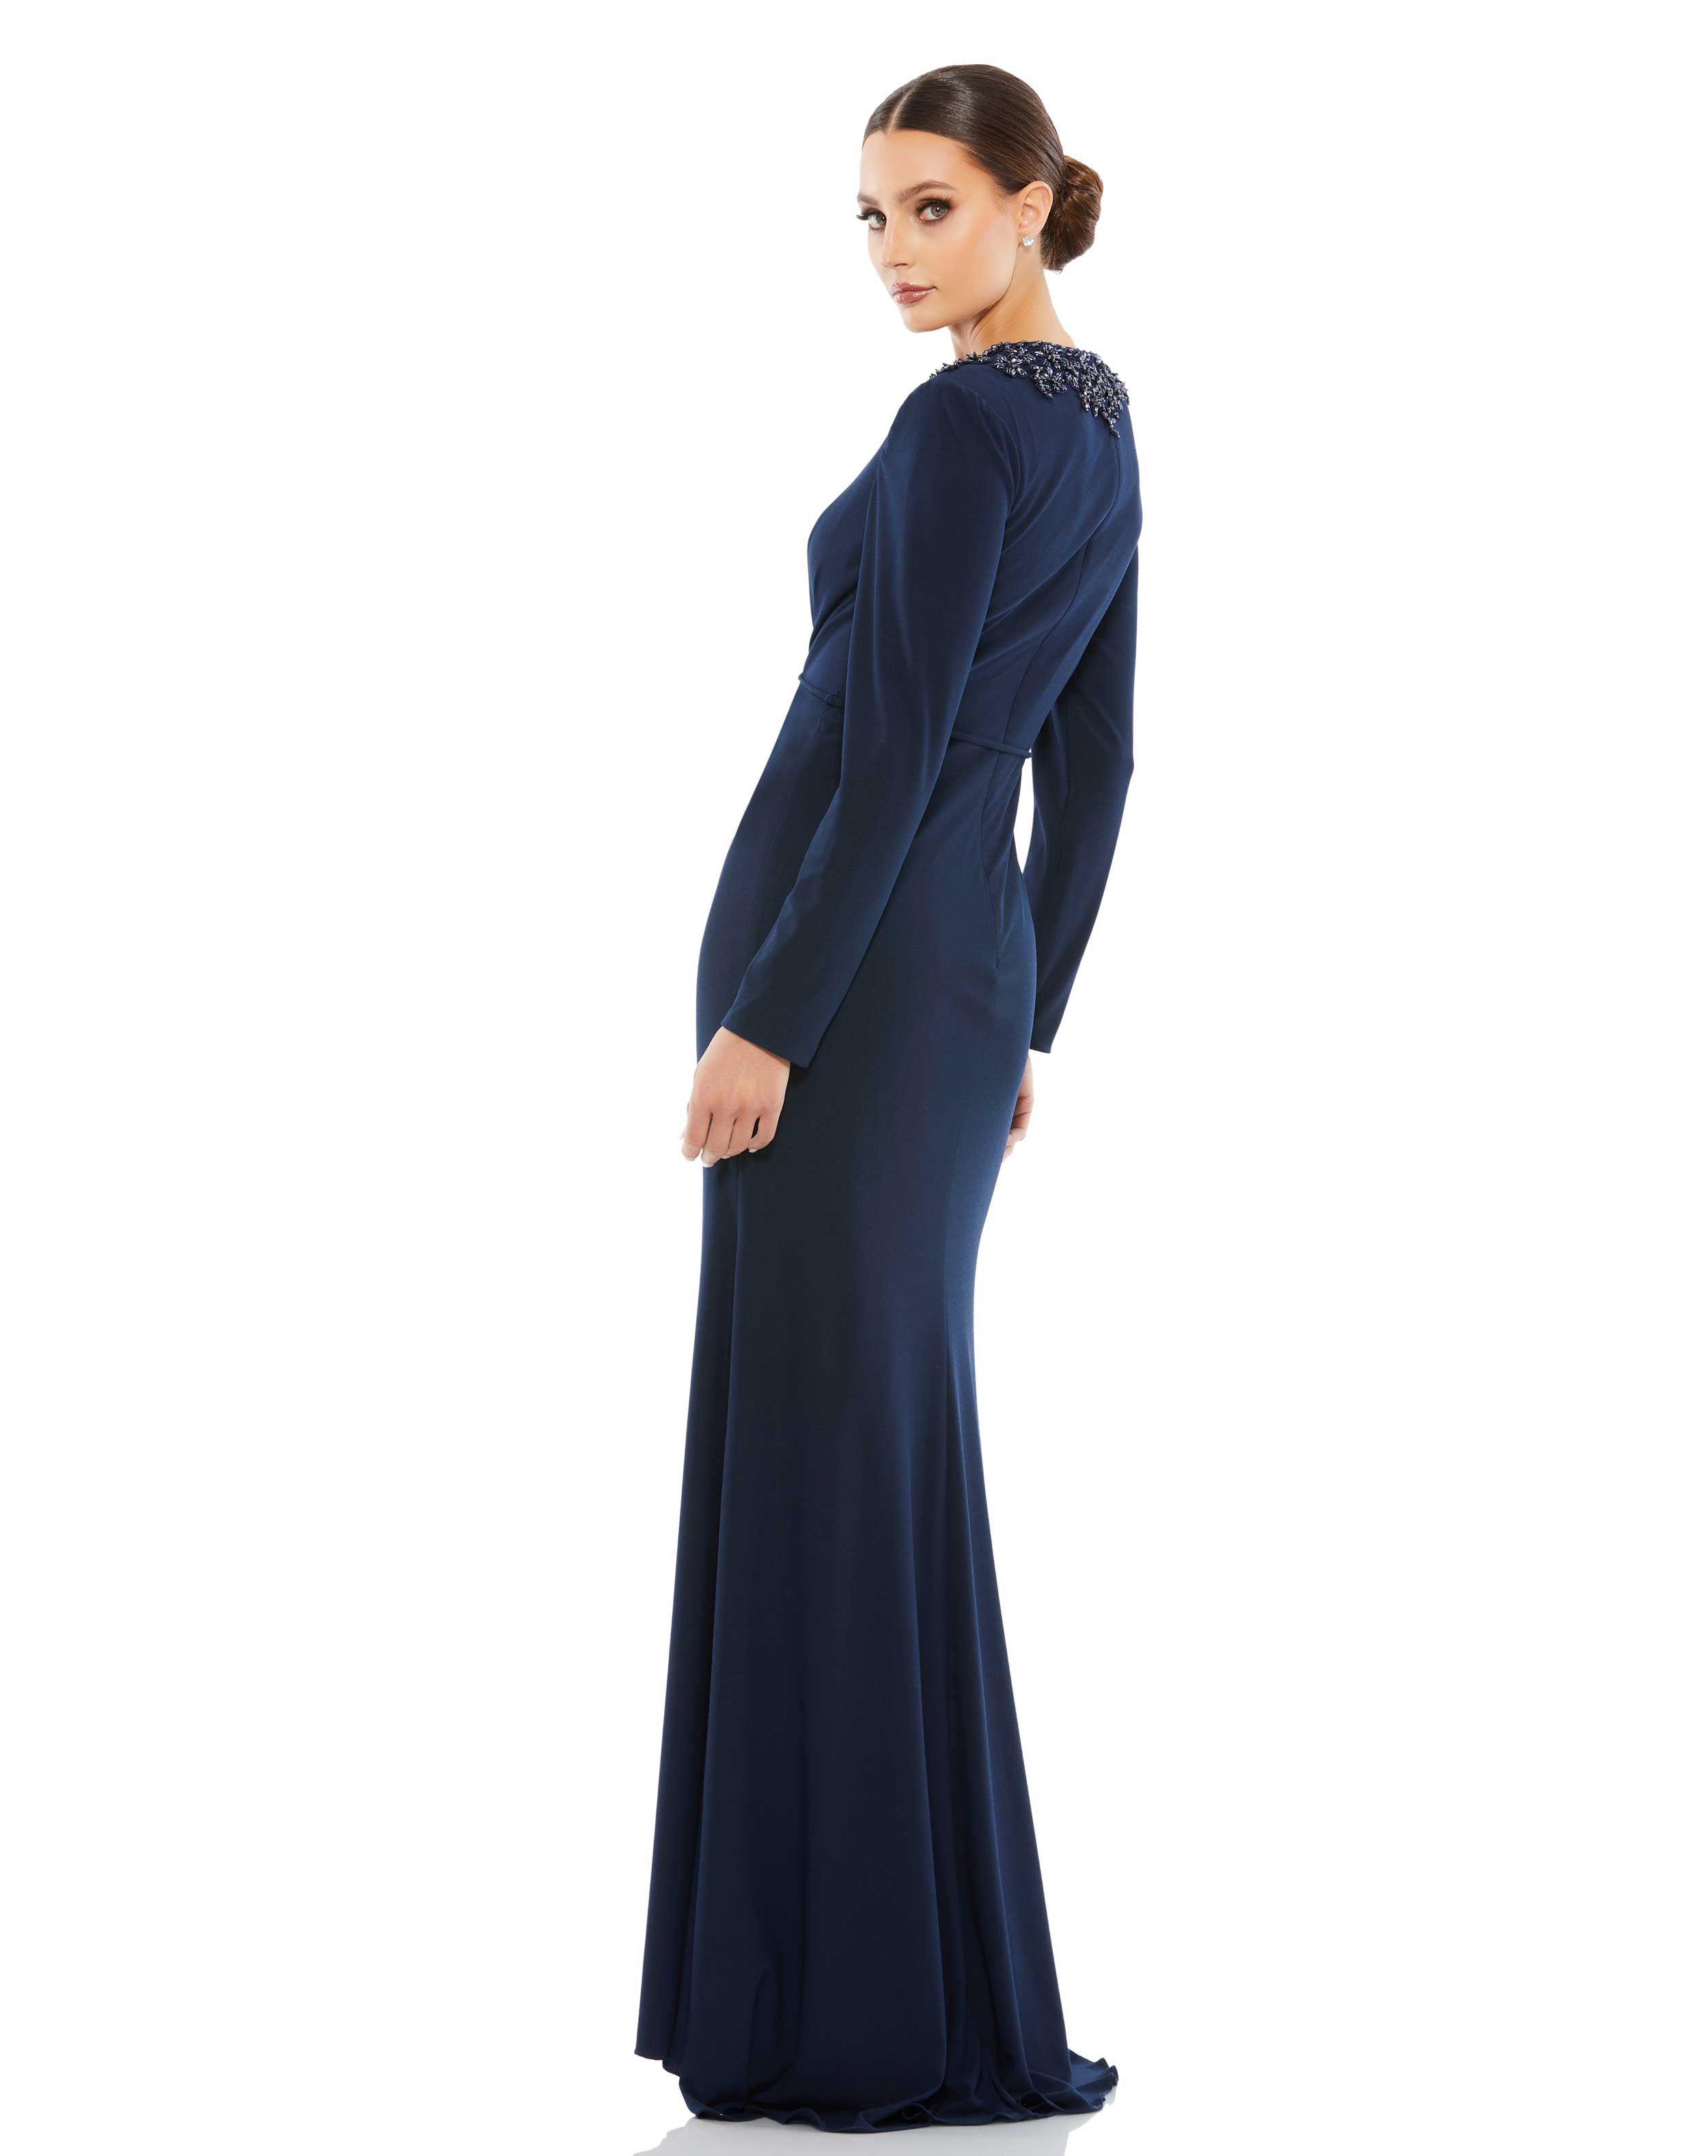 Beaded High Neck Front Twist Long Sleeve Trumpet Gown - FINAL SALE